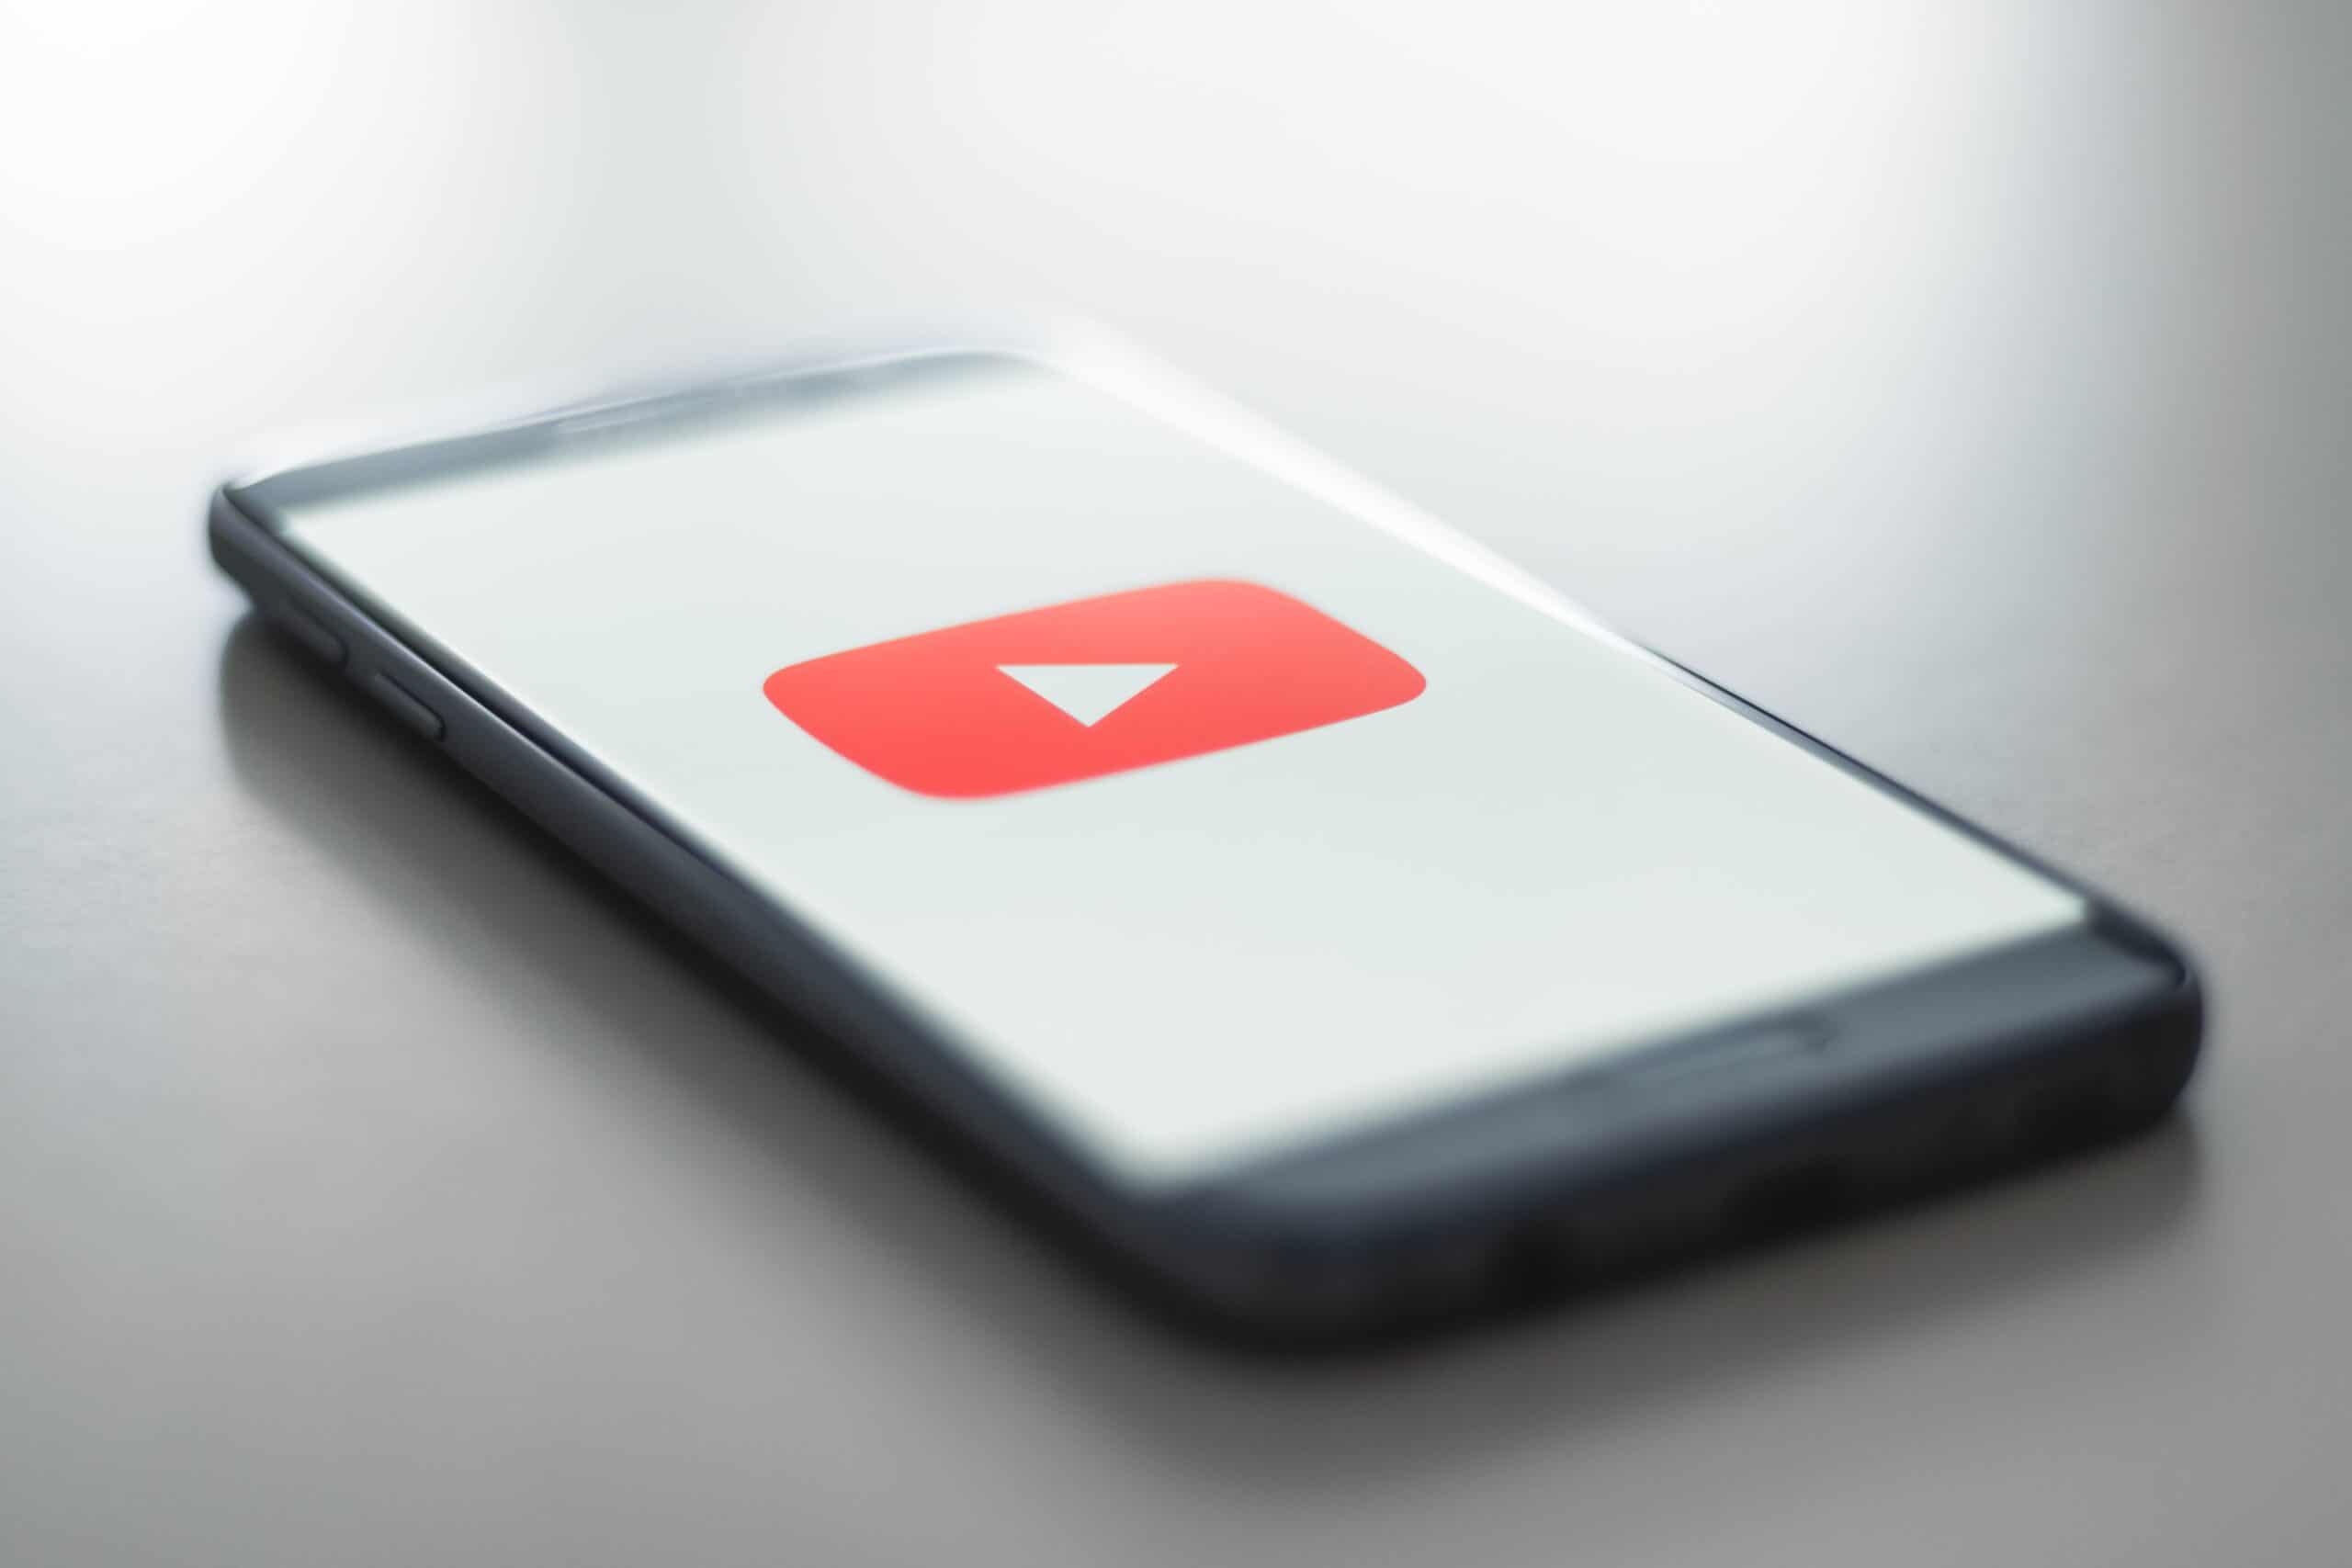 HOW TO PROMOTE YOUR YOUTUBE CHANNEL AND GET MORE VIEWS